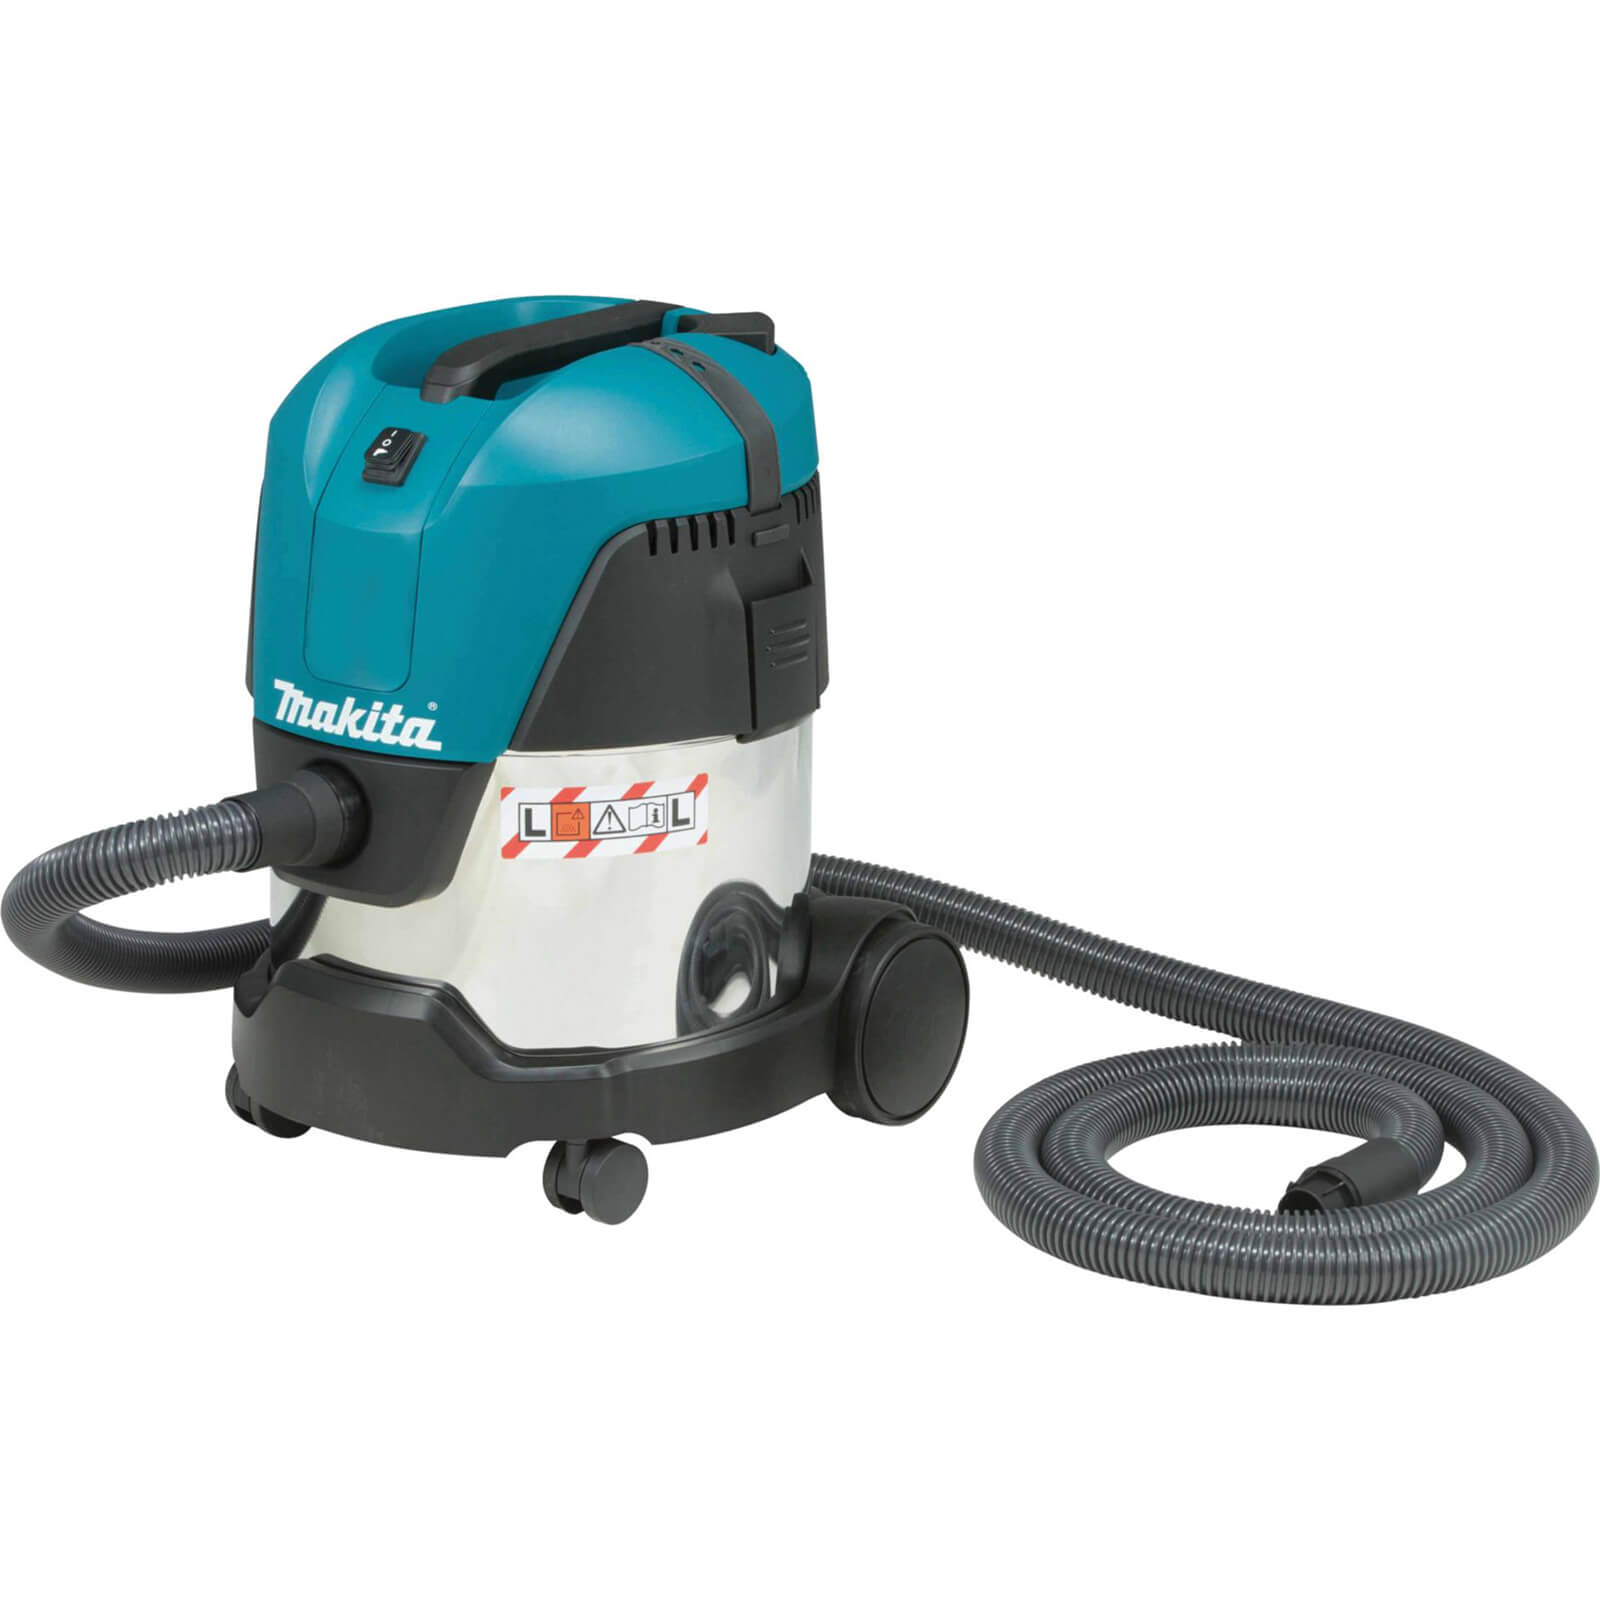 Image of Makita VC2012L L Class Dust Extractor 240v